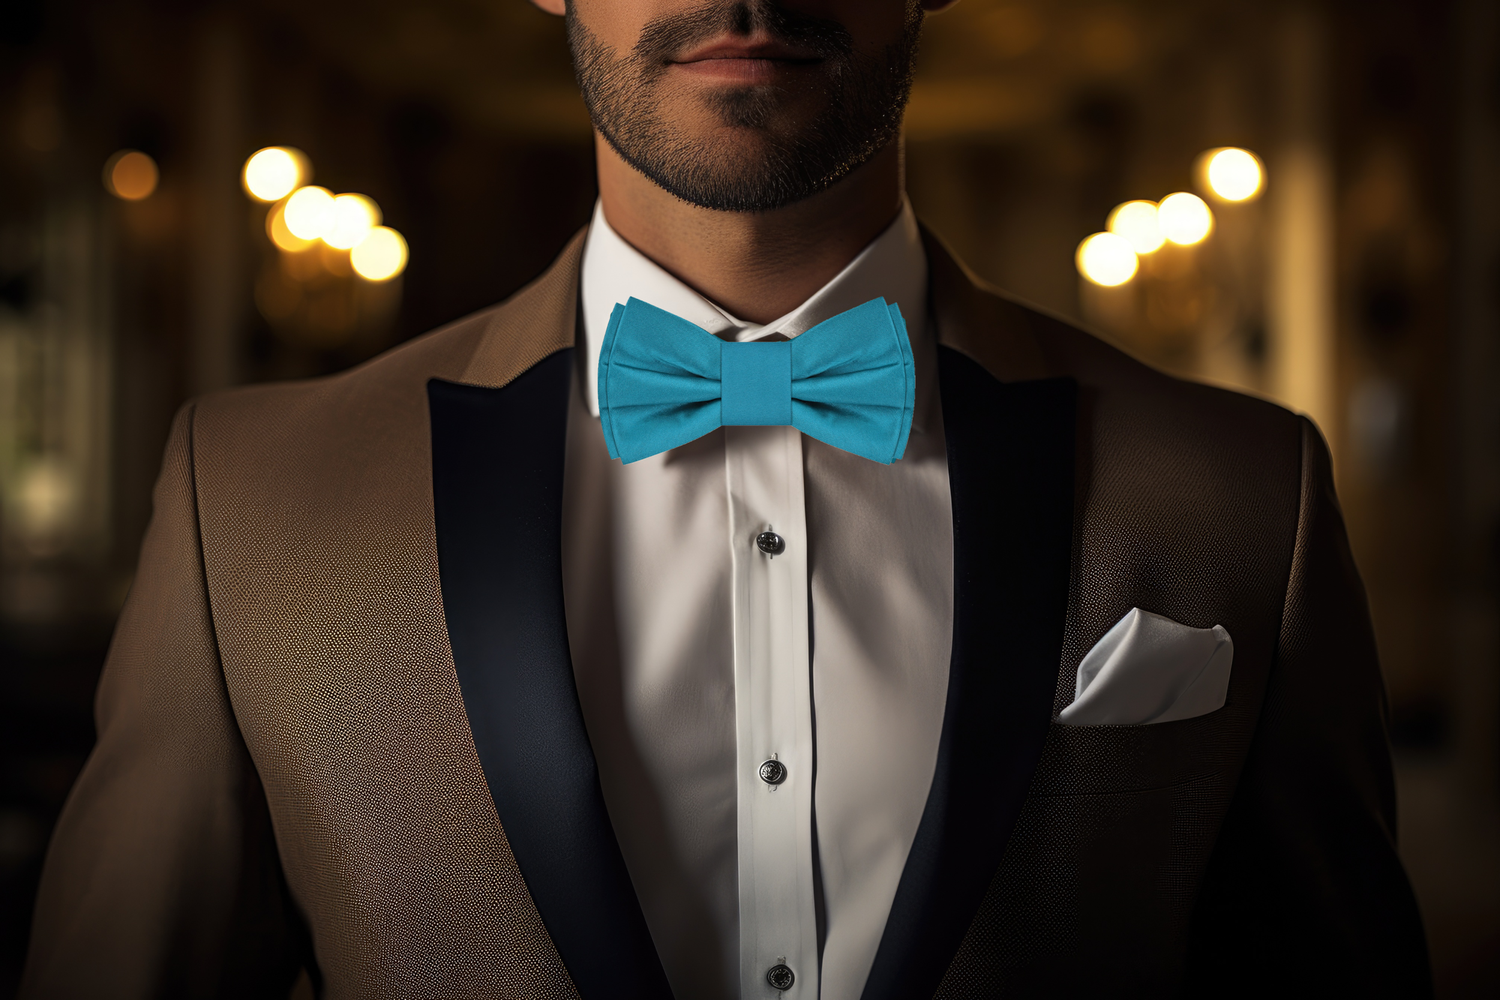 Caribbean Solid Colored Bow Tie and White Square on Brown Suit